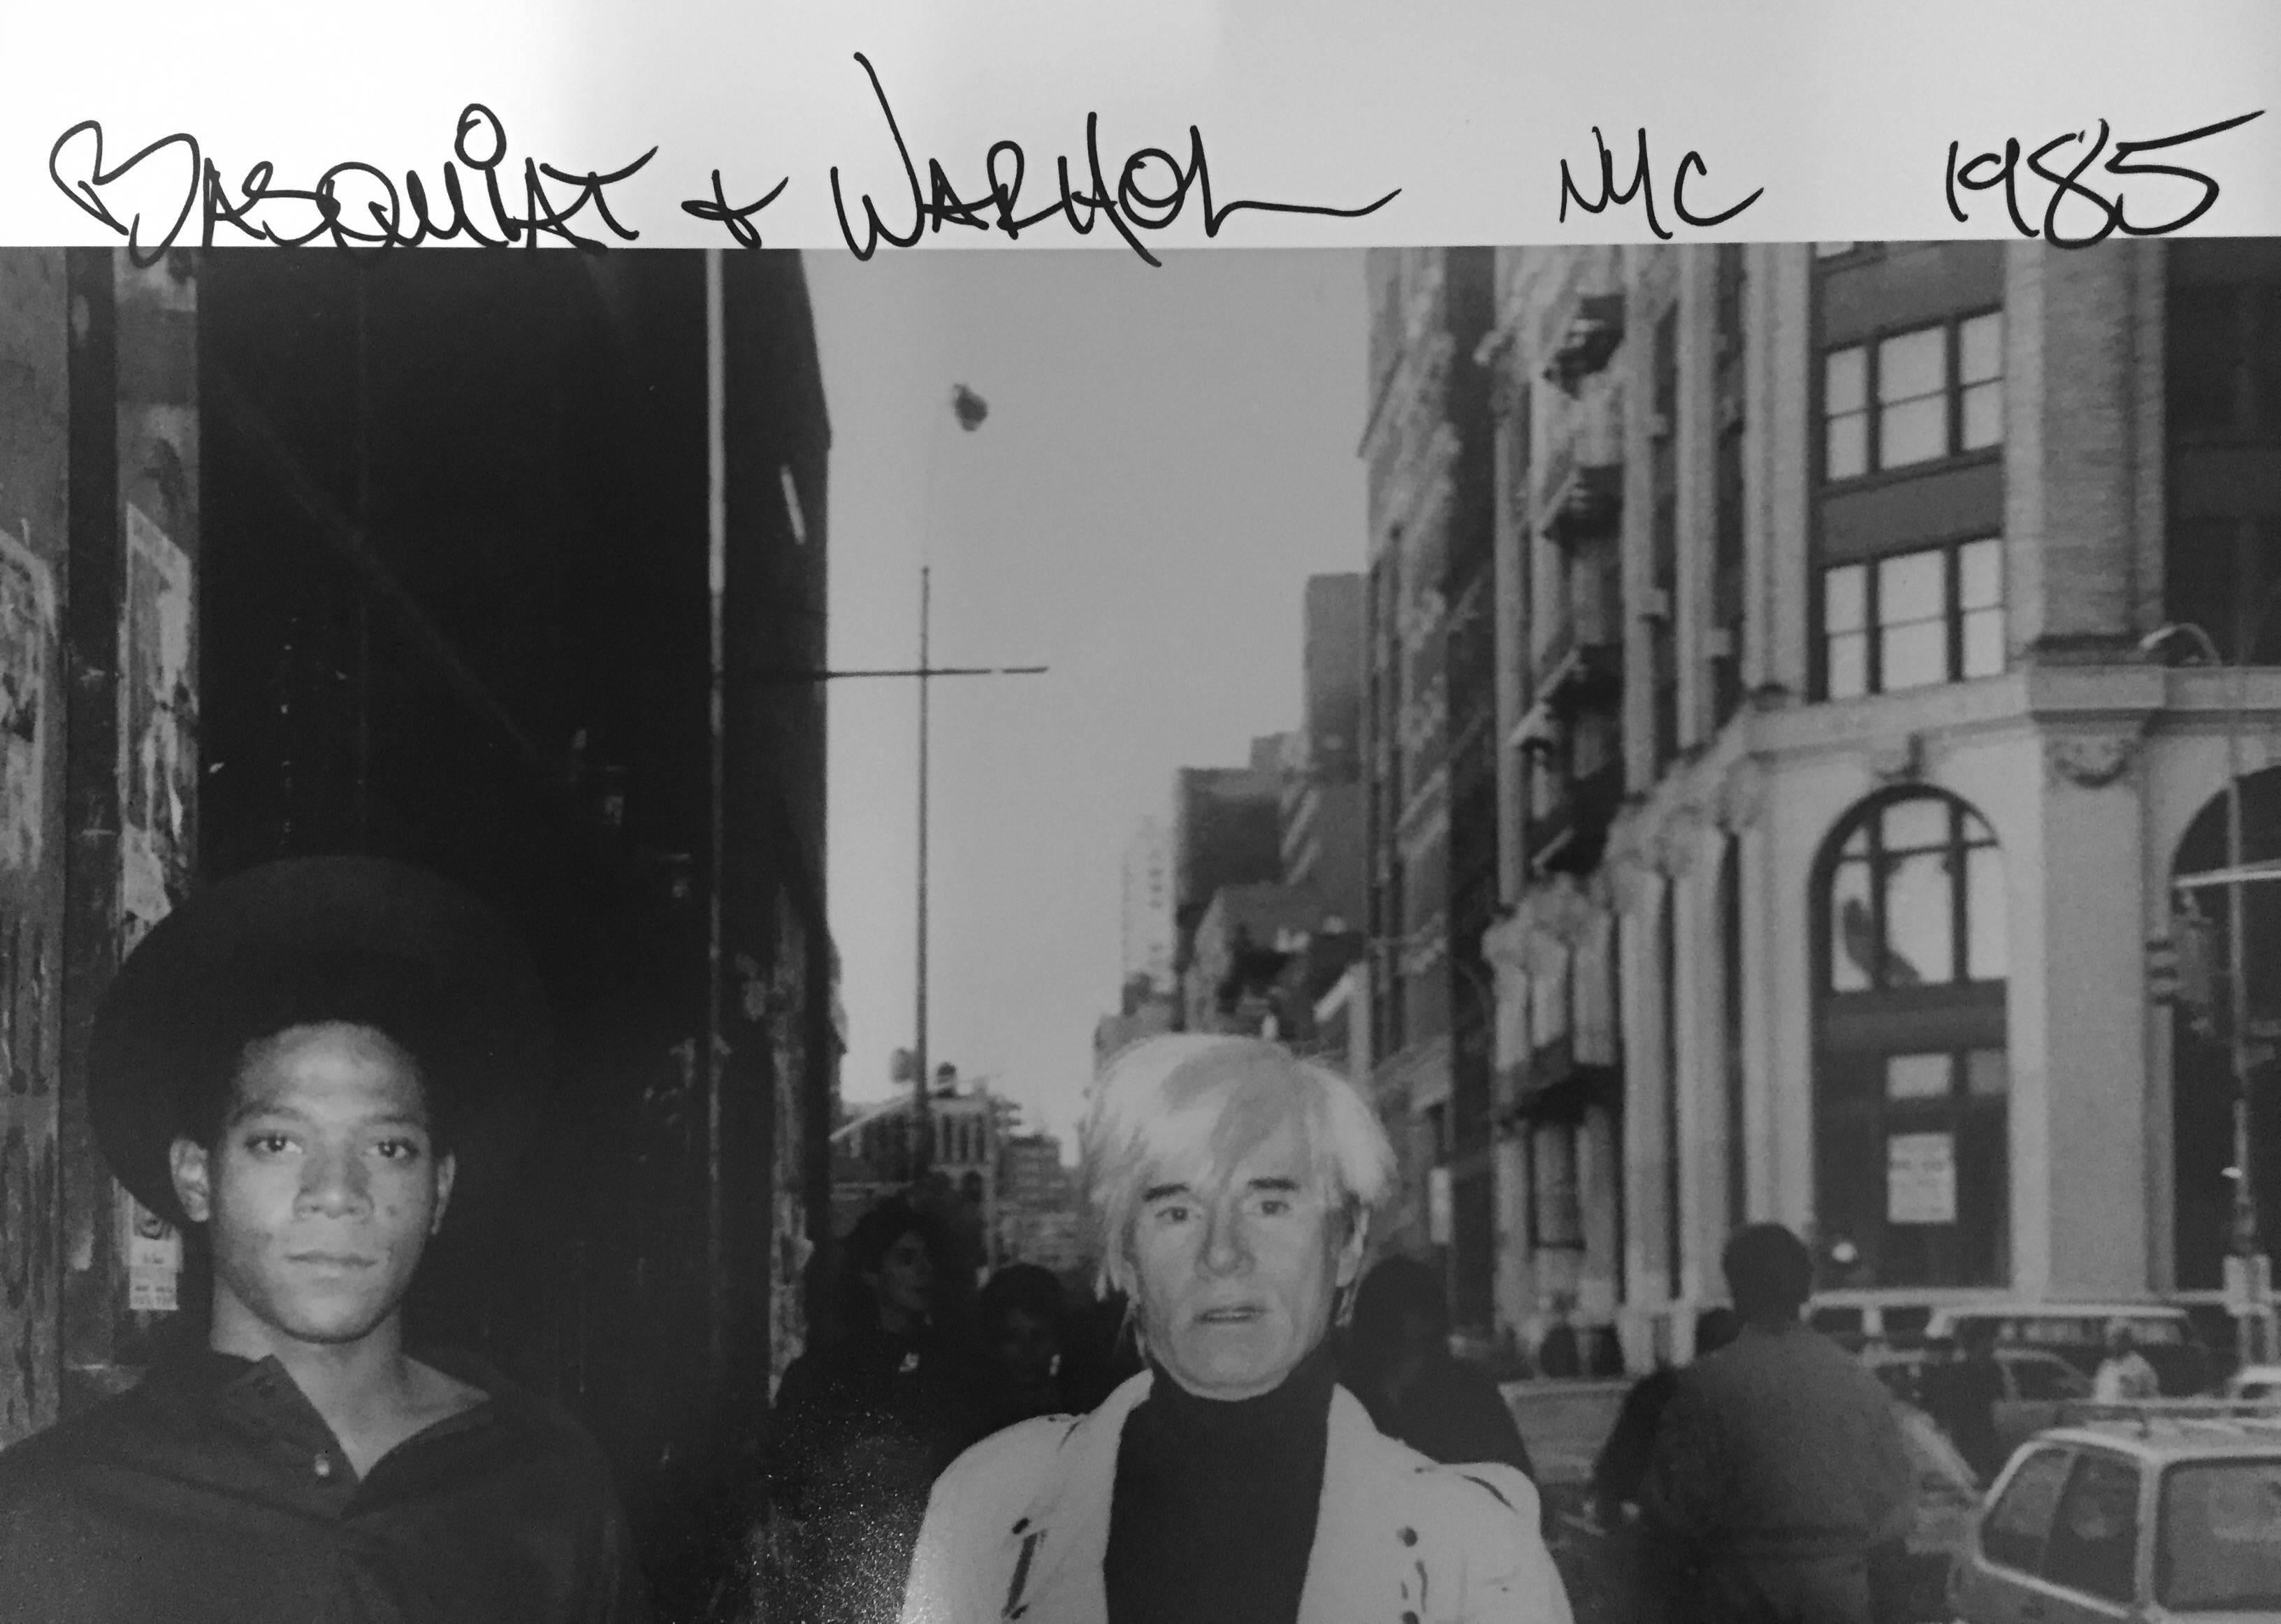 Andy Warhol and Jean-Michel Basquiat, Mercer Street, 1985 Edition 250 - Photograph by Ricky Powell